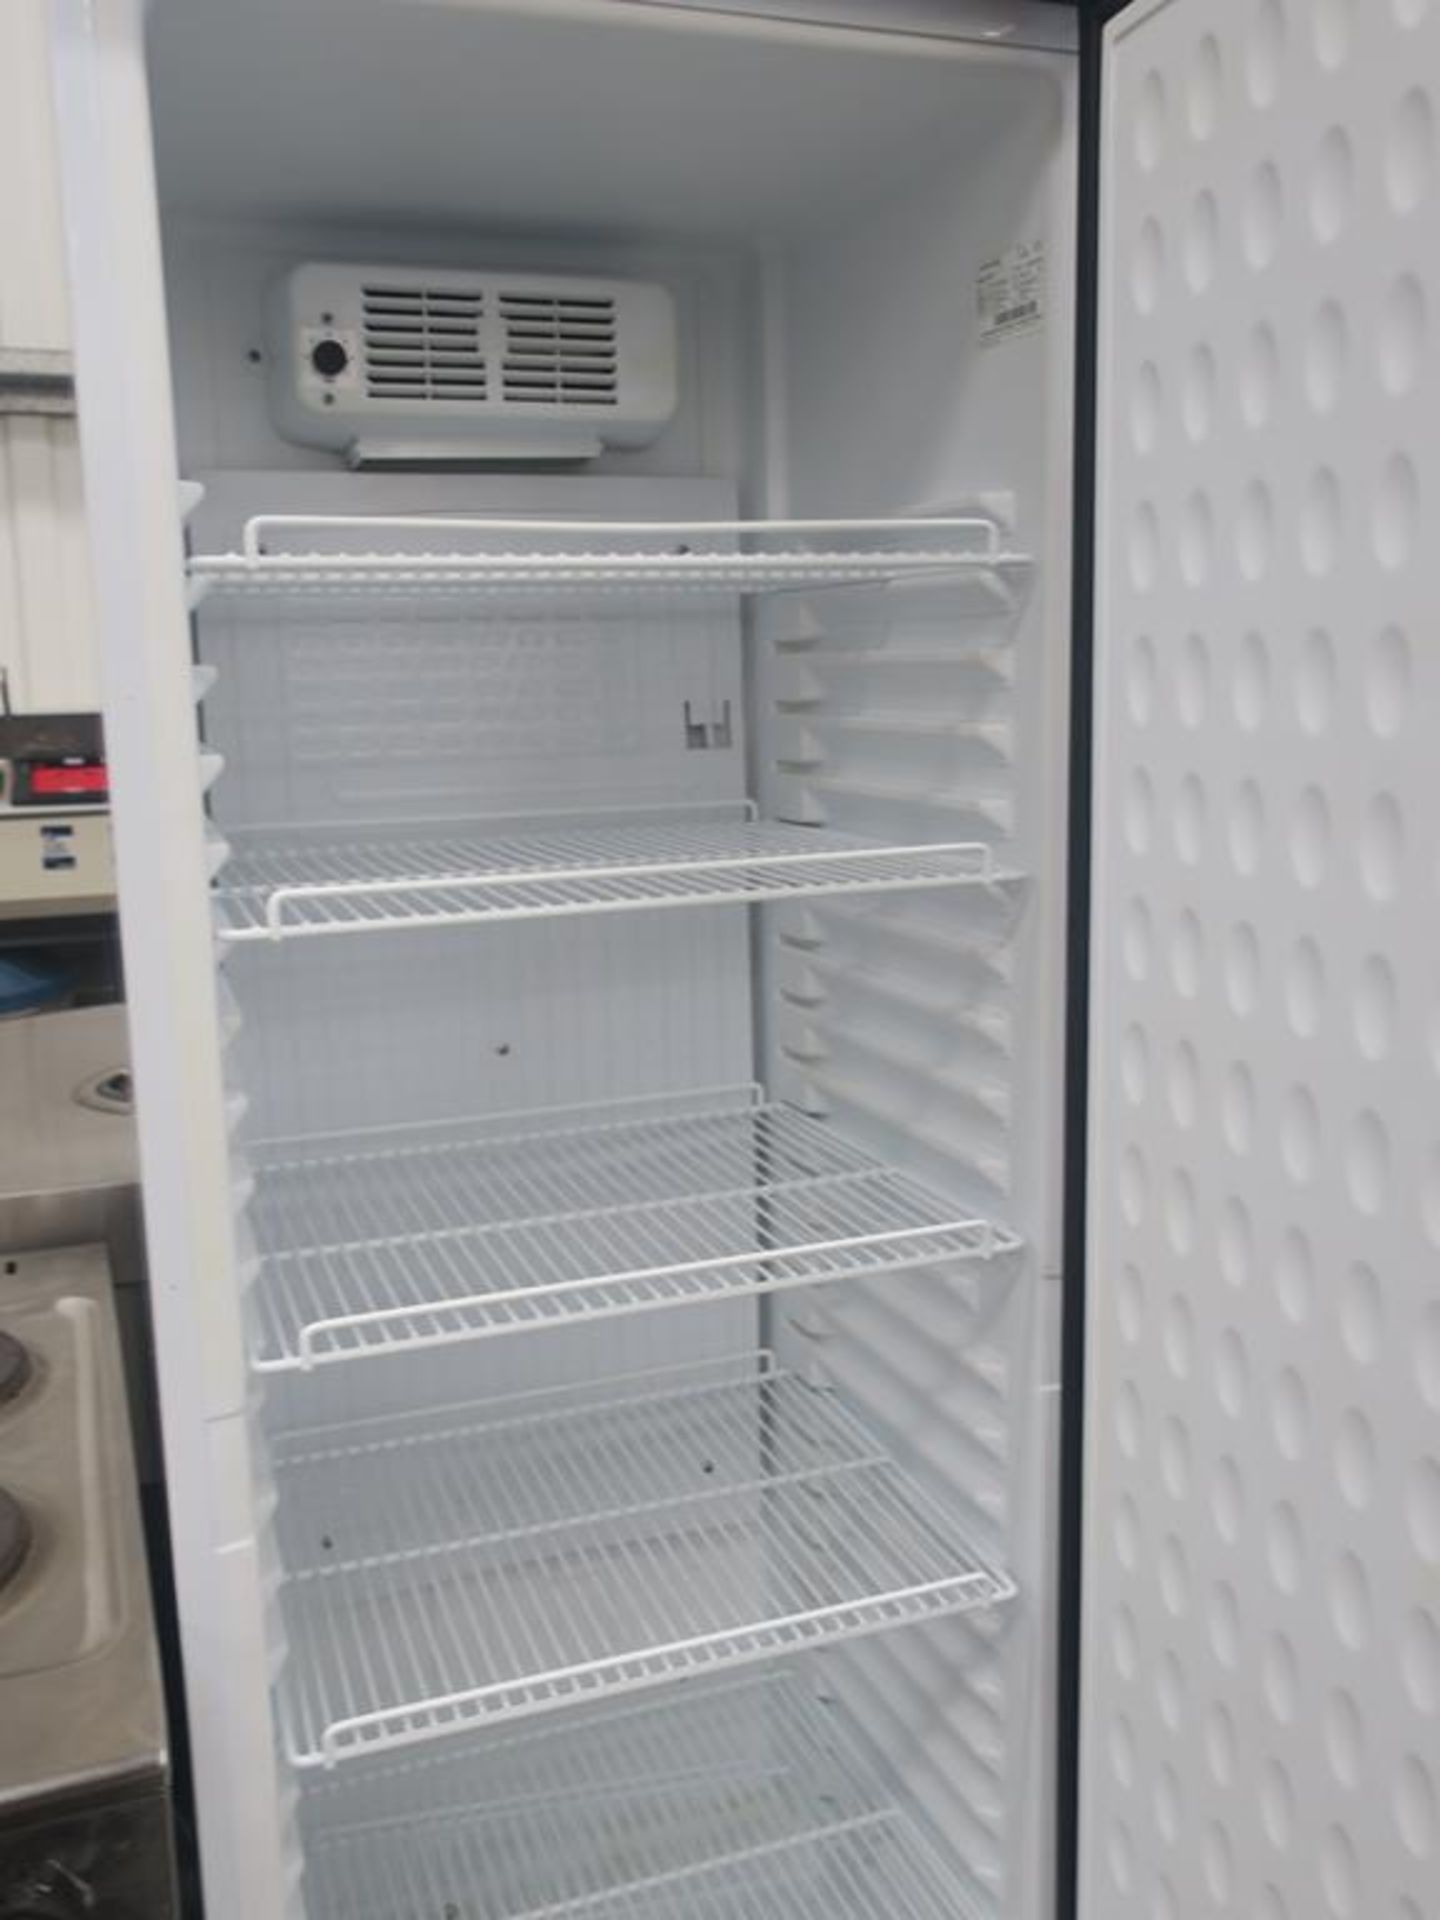 * A Tefcold Tall Fridge (model No SU1375). Please note there is a £5 plus VAT Lift Out Fee on this - Image 5 of 5